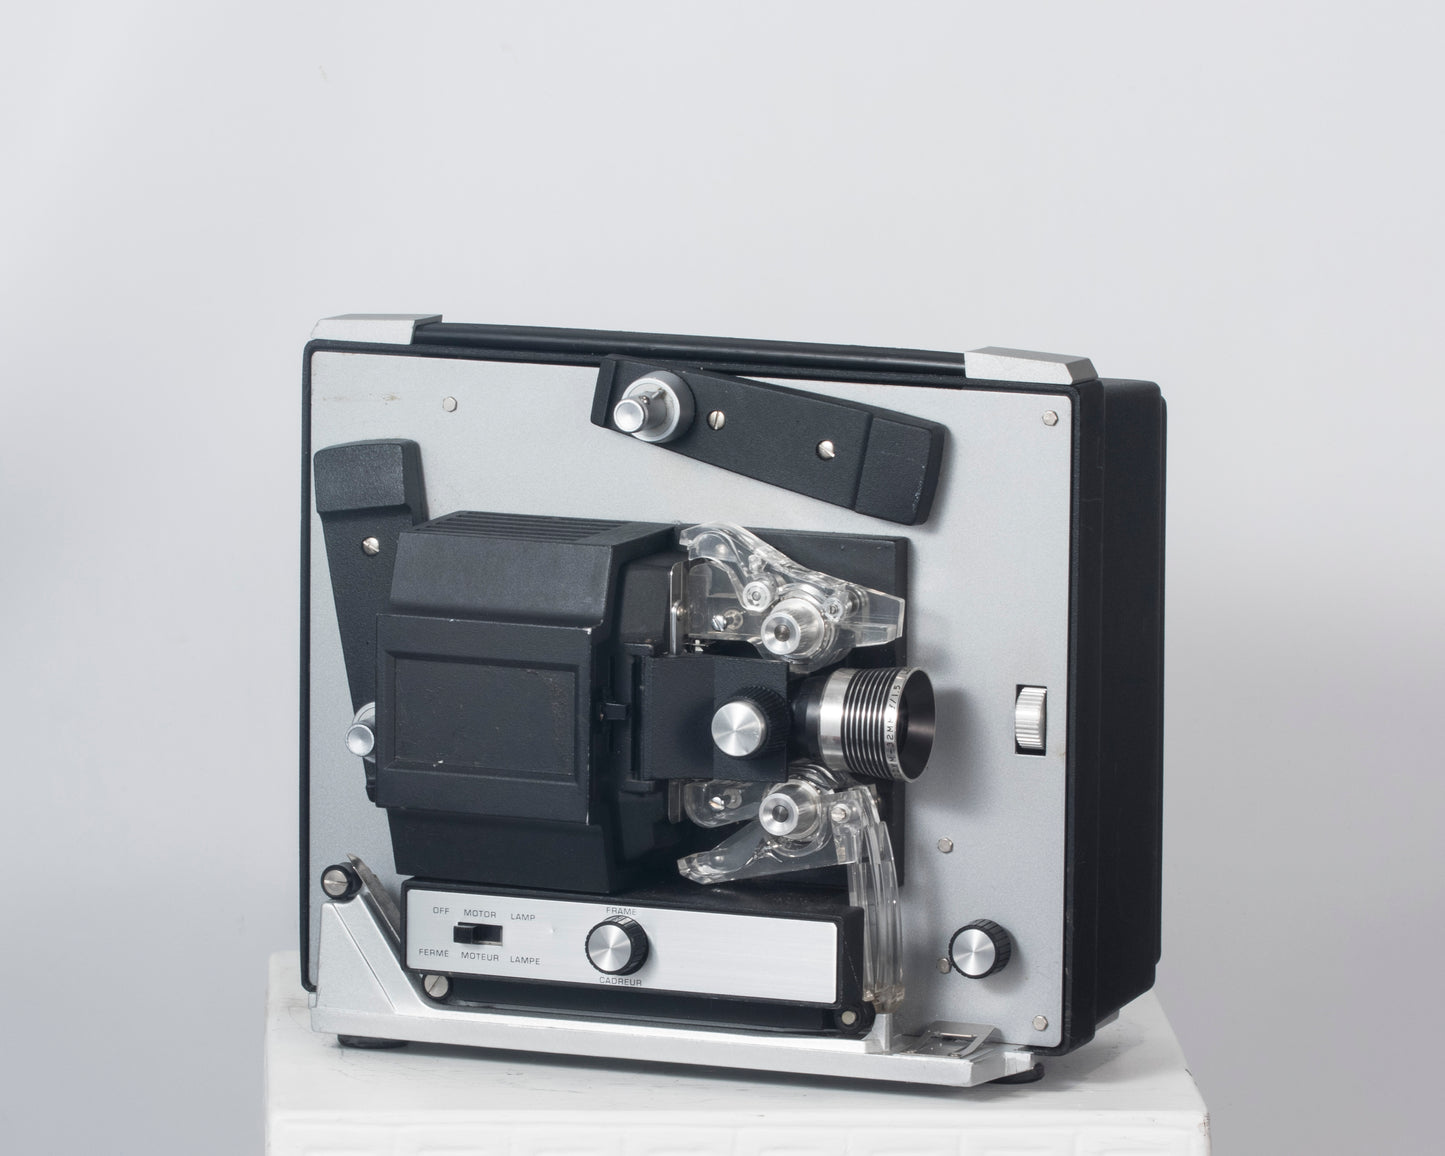 Bell and Howell 461 Super 8 movie projector